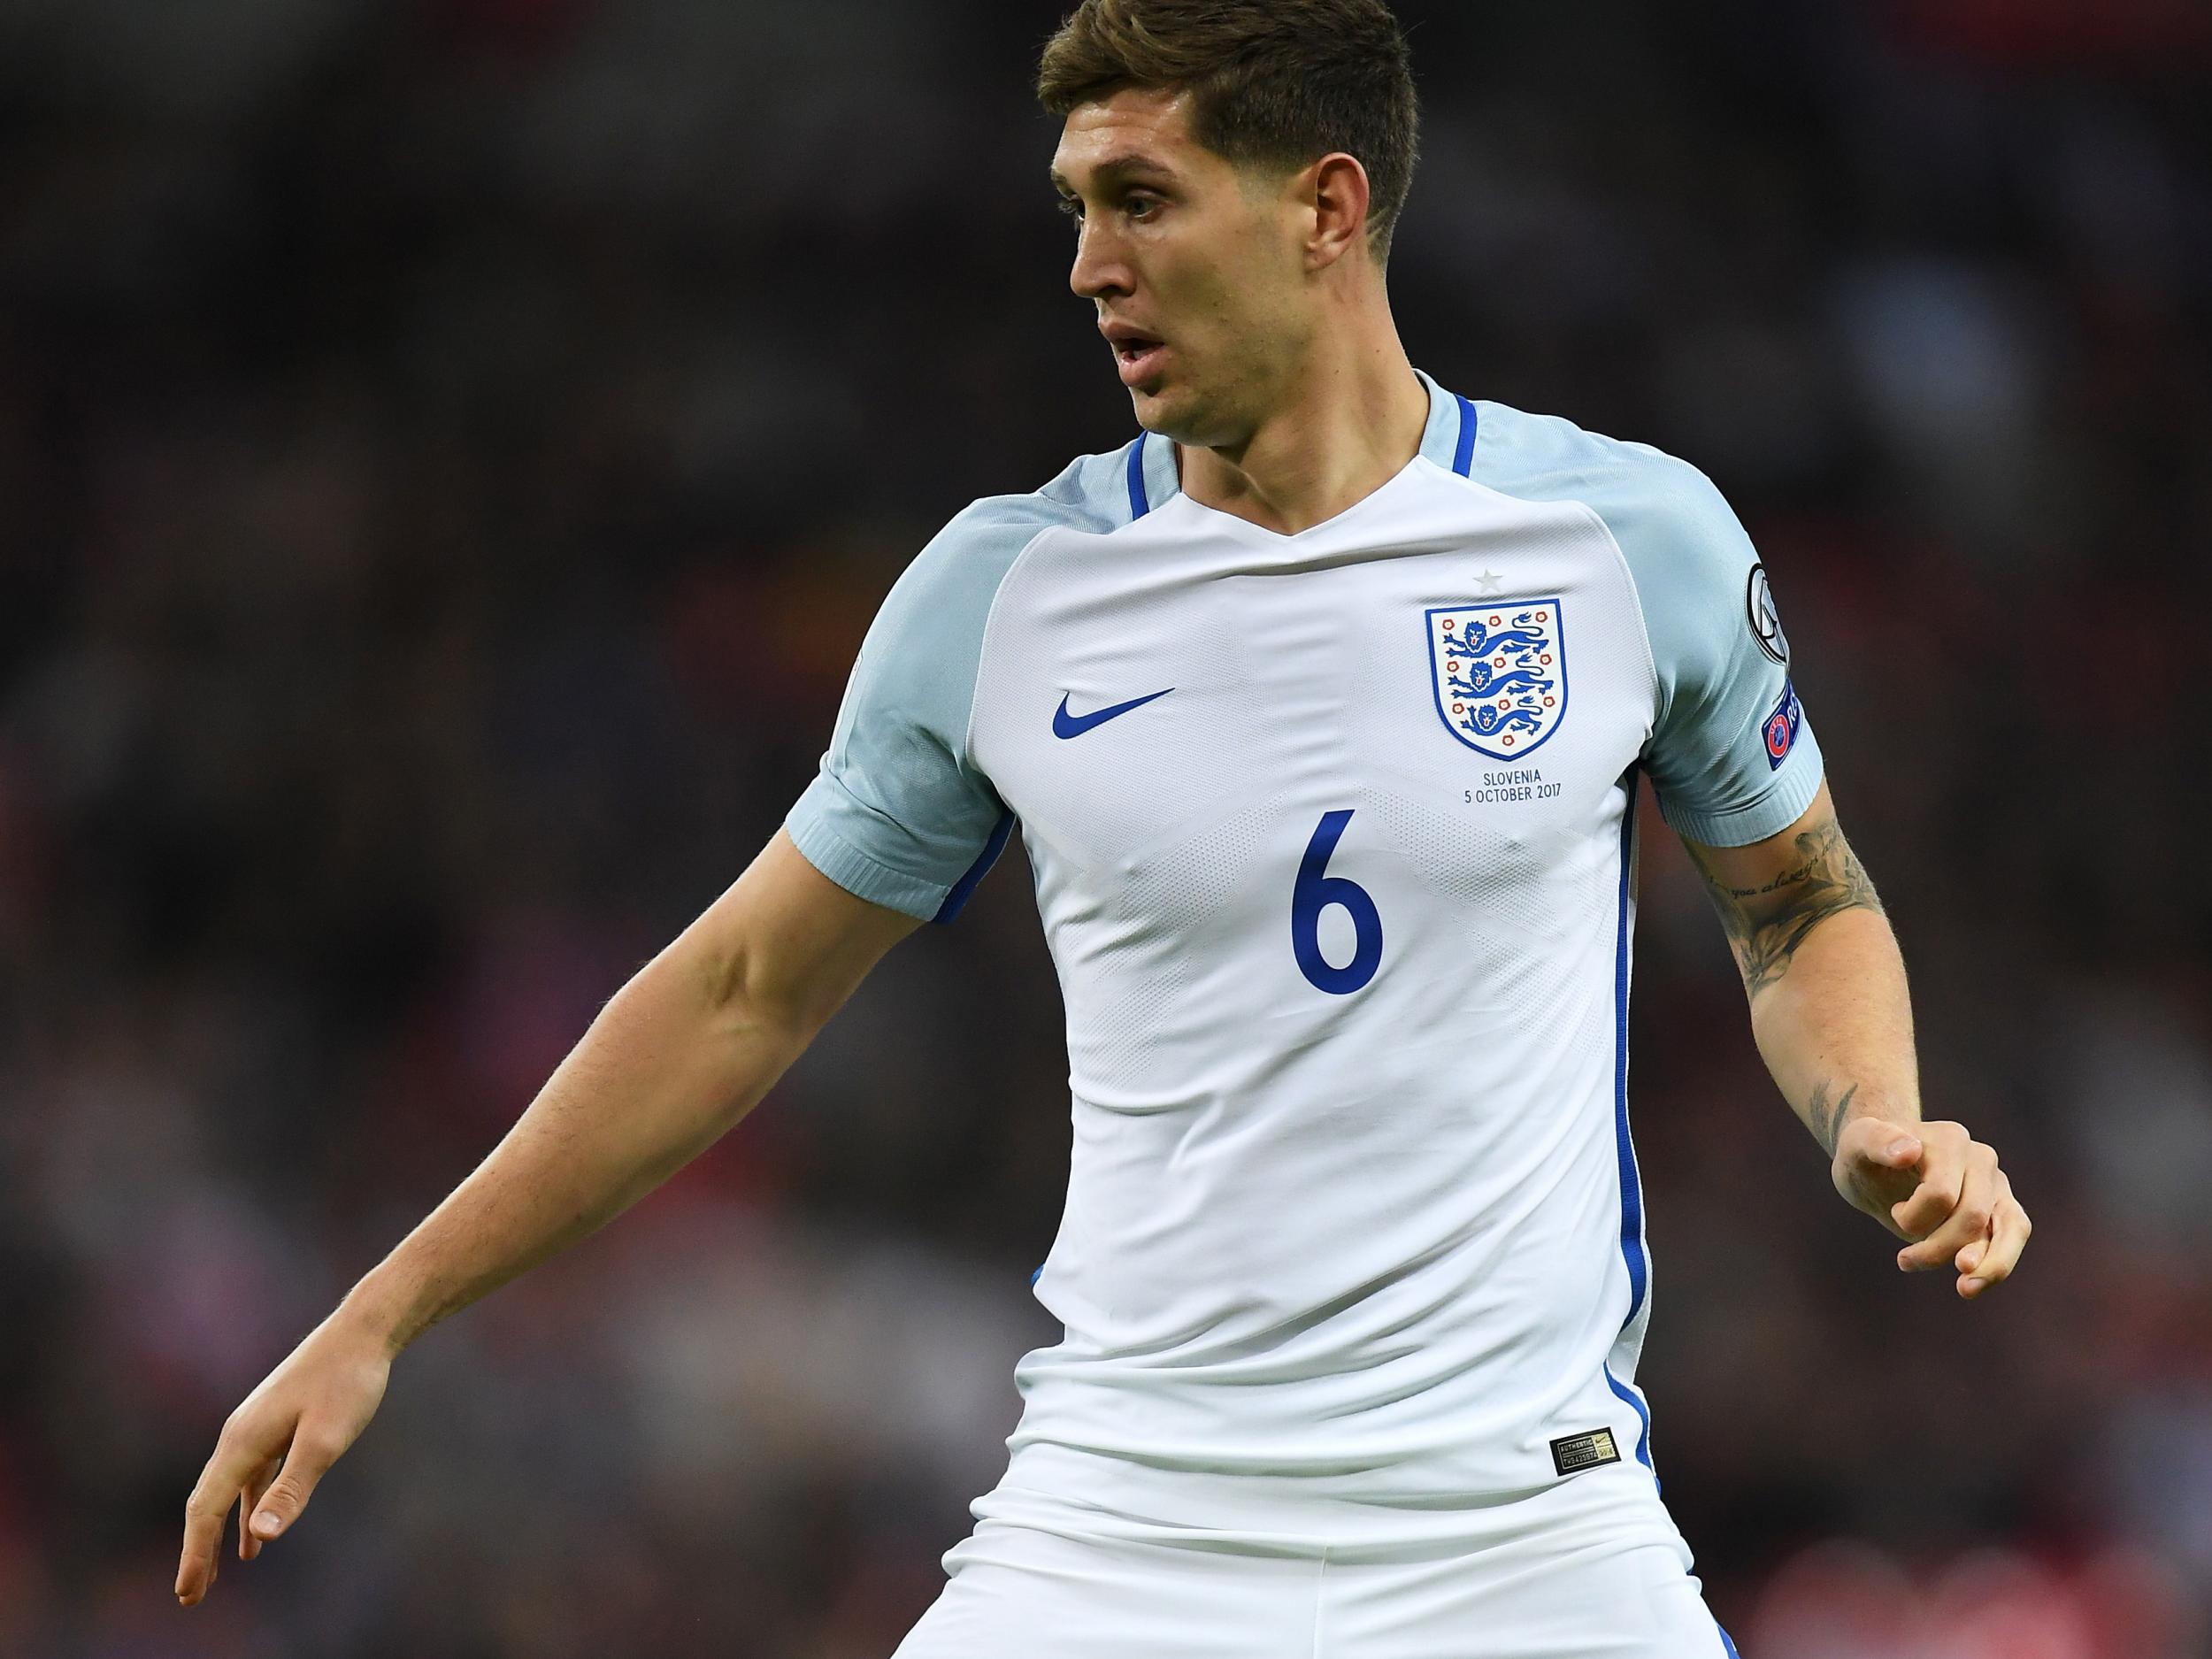 Southgate favours the style of play showcased by the likes of John Stones